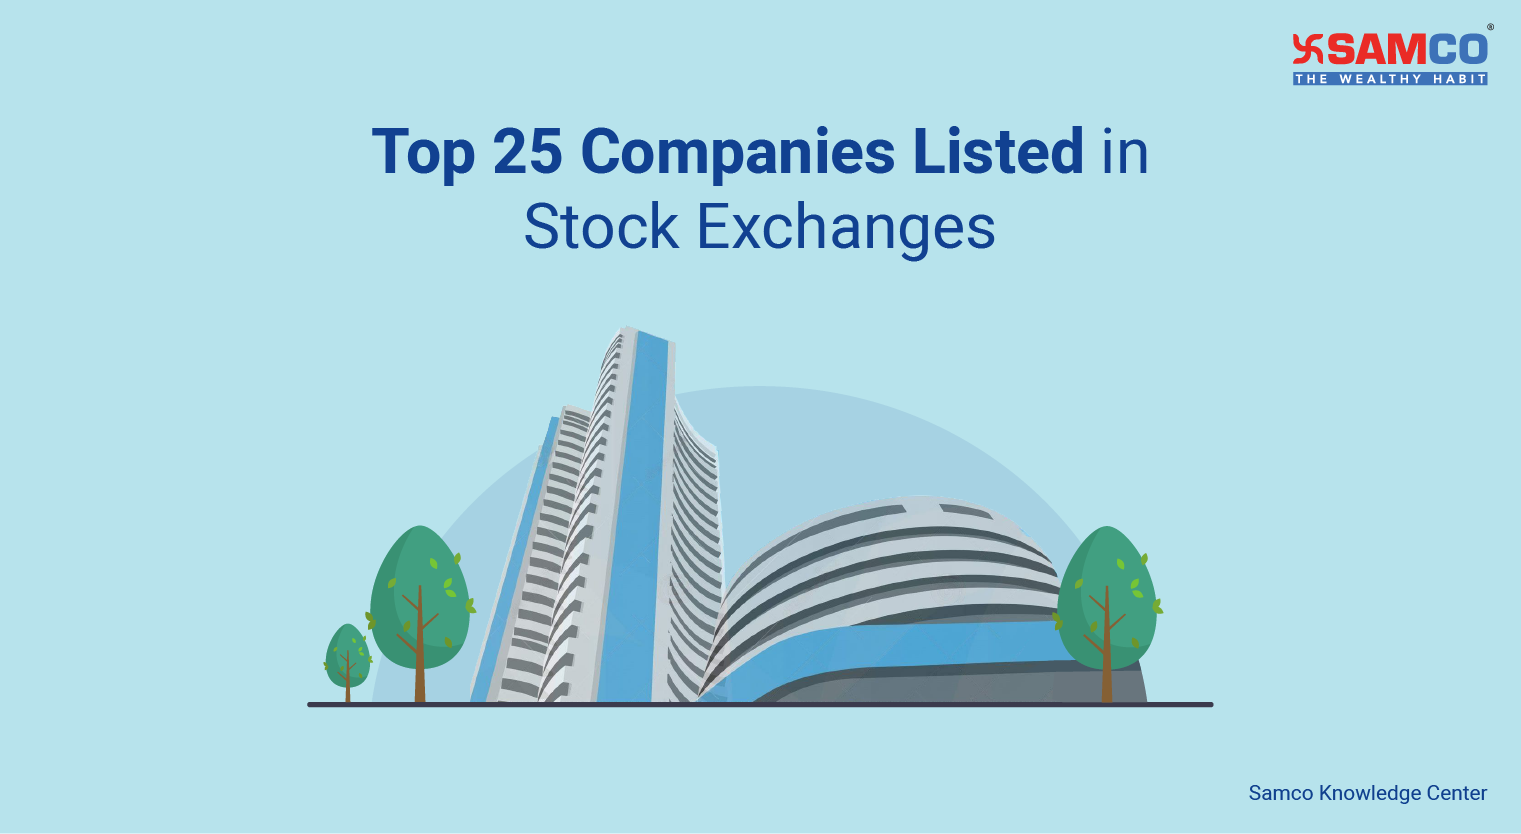 Top 25 Companies Listed in Stock Exchanges